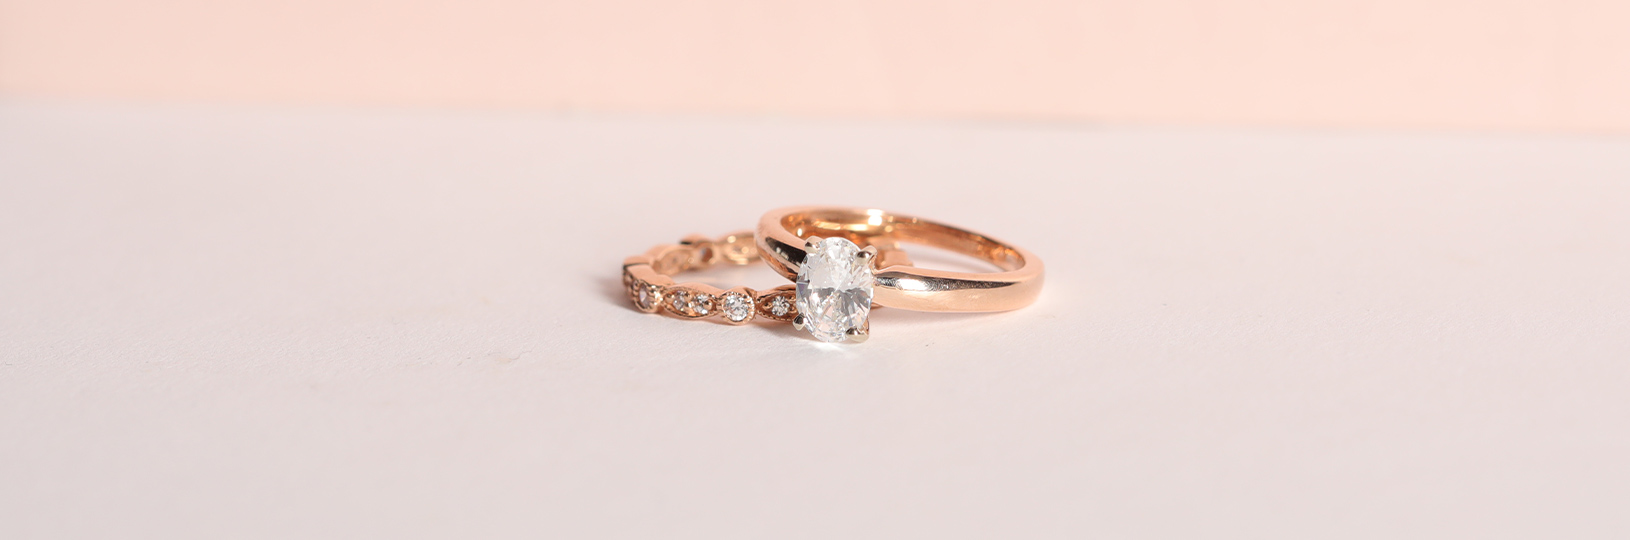 Can't buy me love? 5 engagement ring buying tips | Globalnews.ca